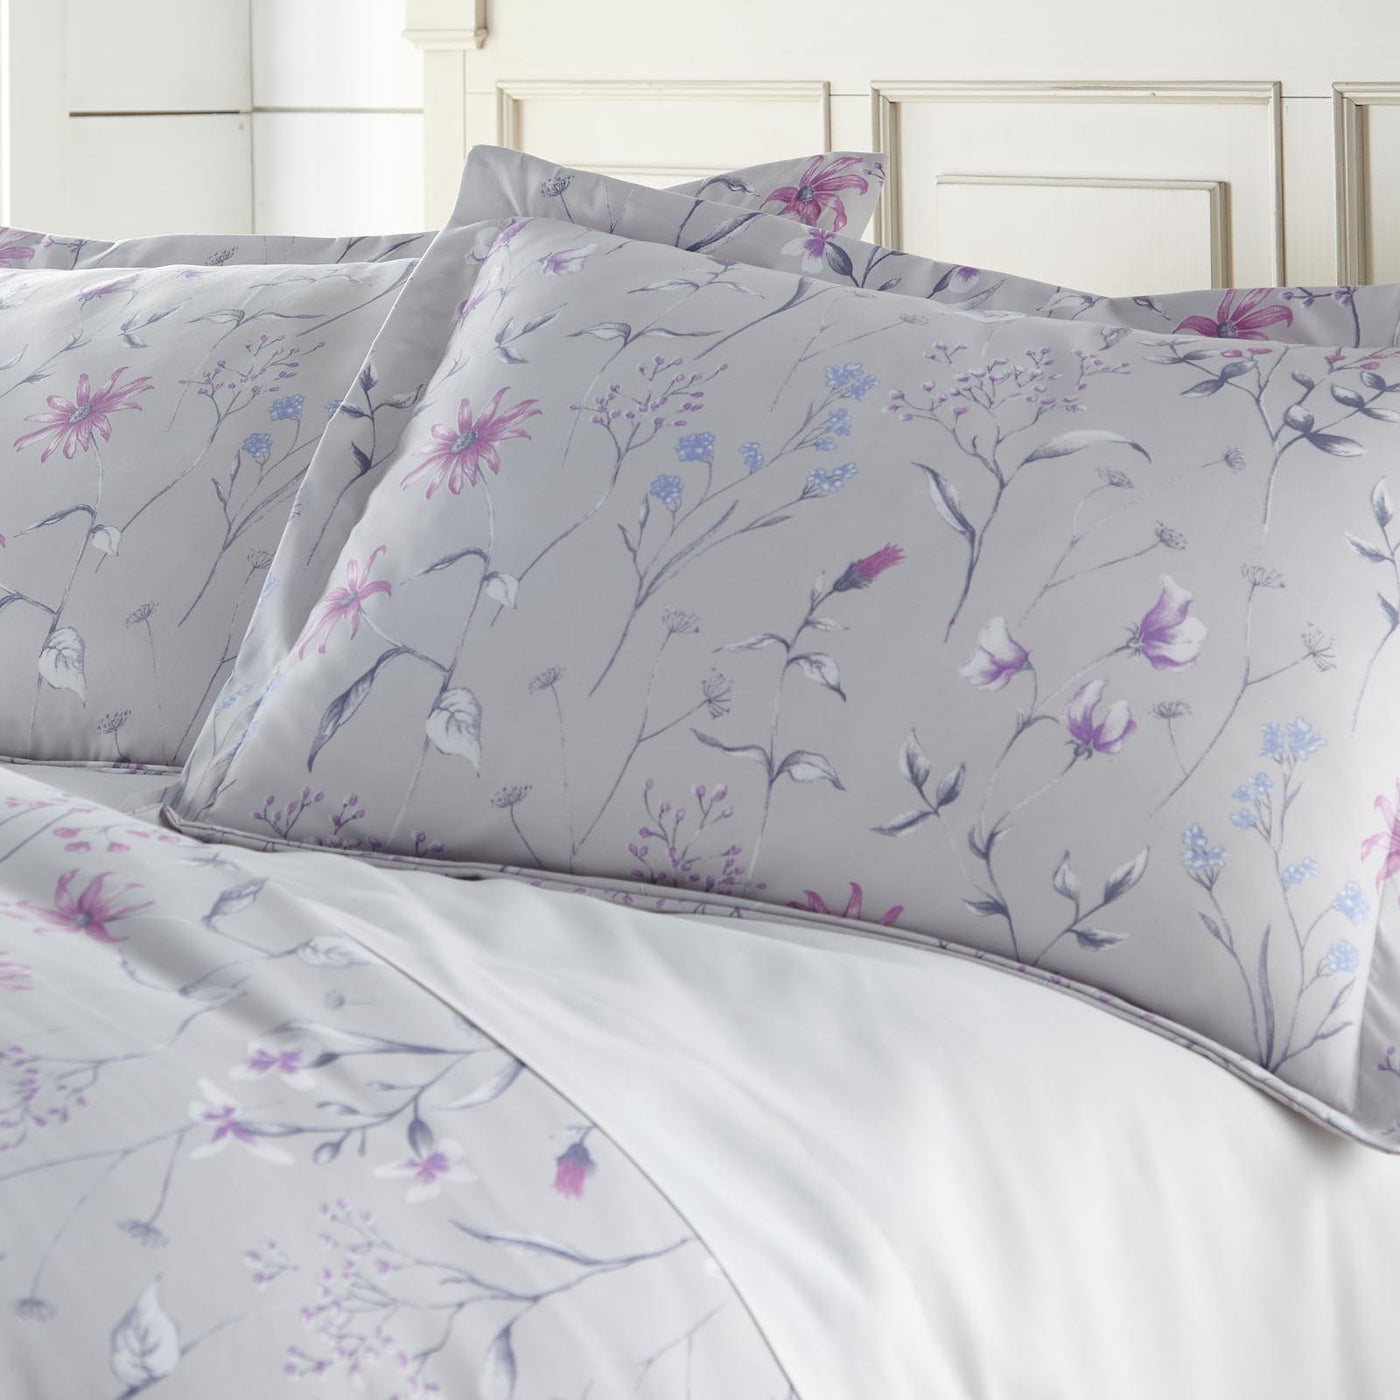 Floral Daydream in grey floral print duvet cover set